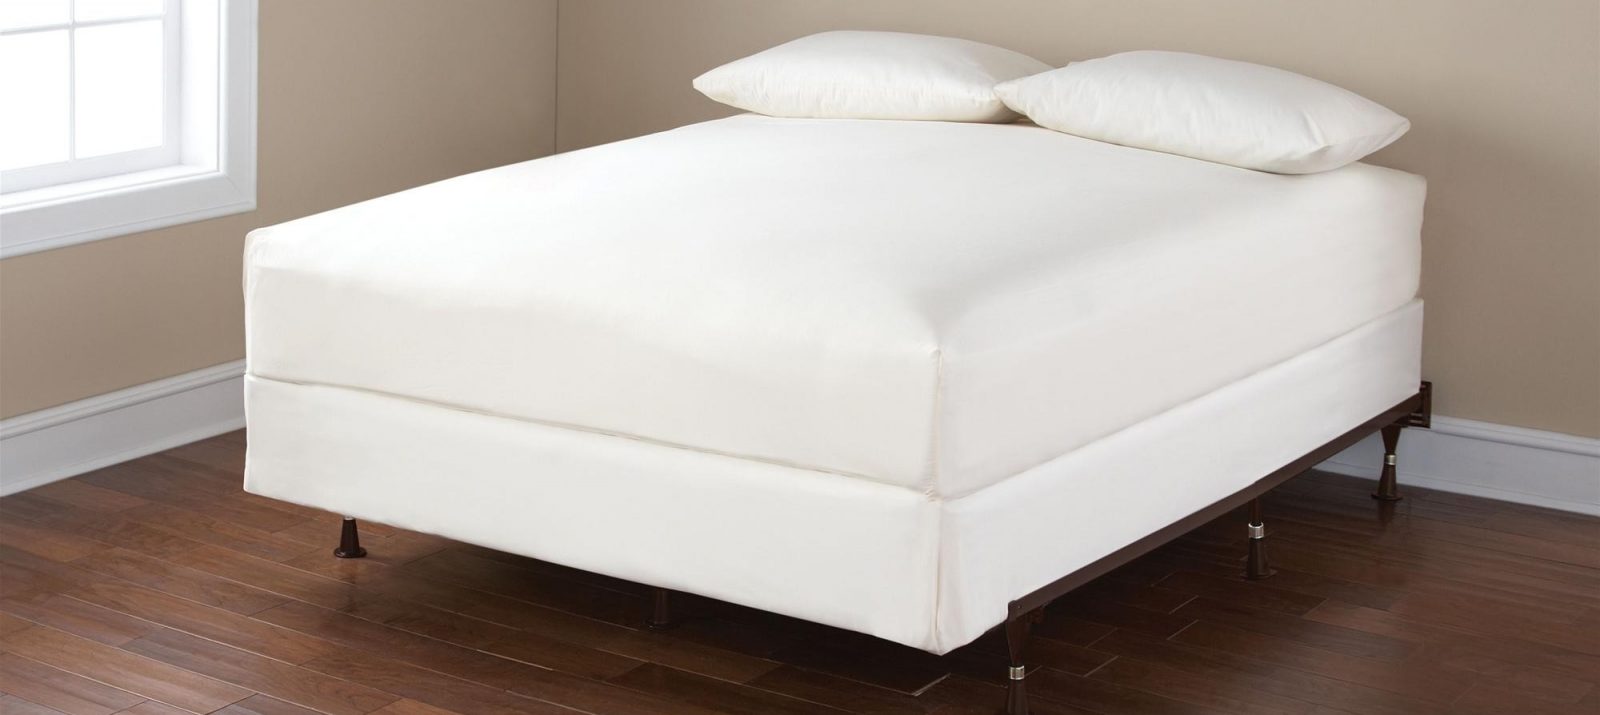 mattress without box spring bed frame